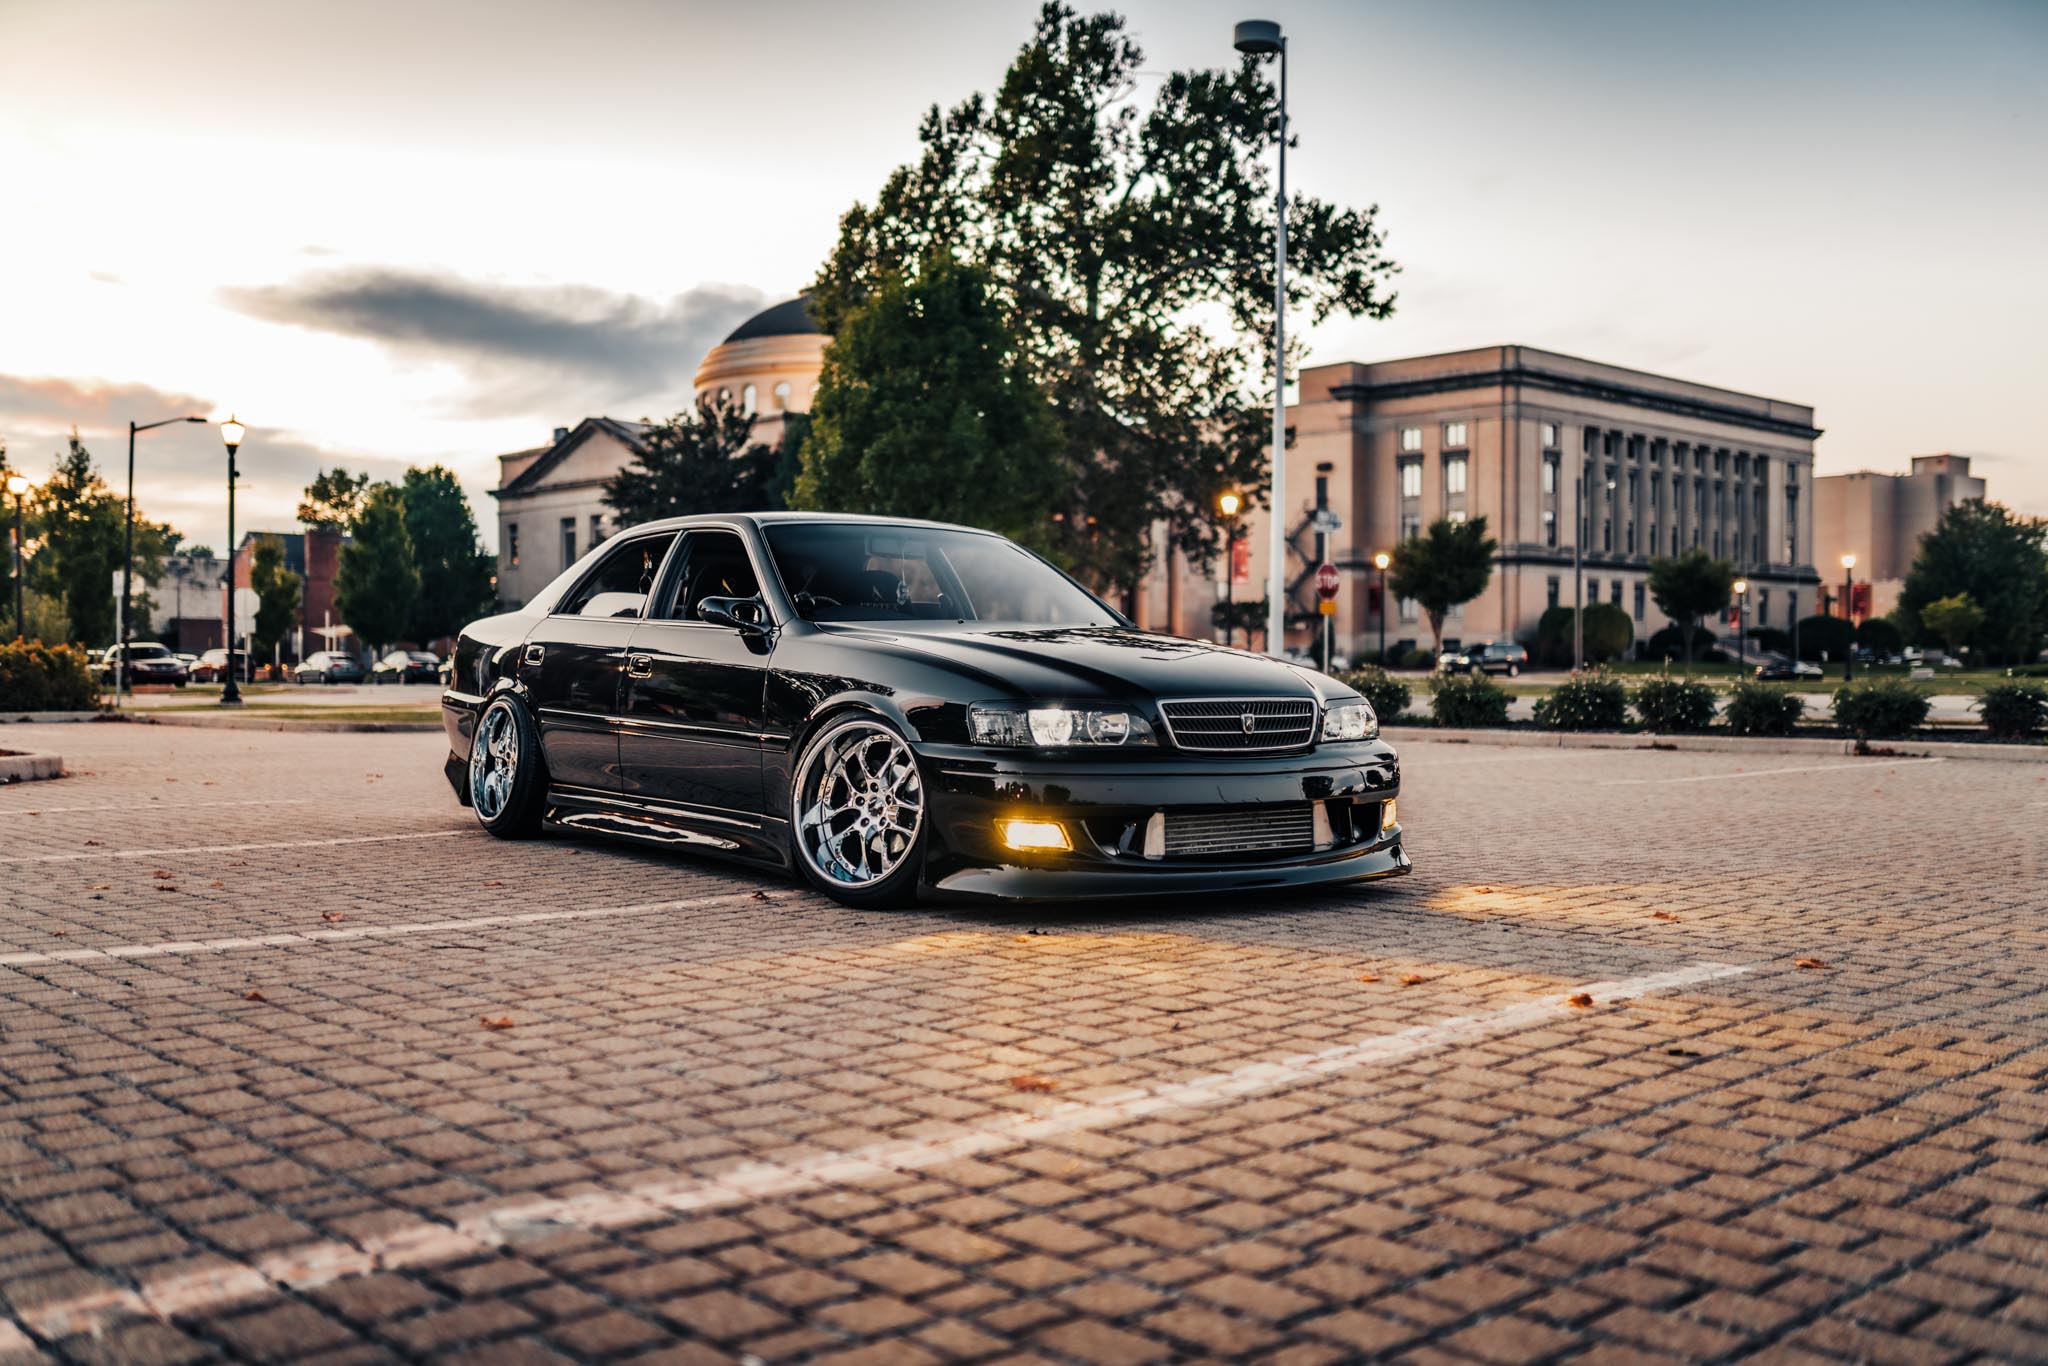 Toyota Chaser stance